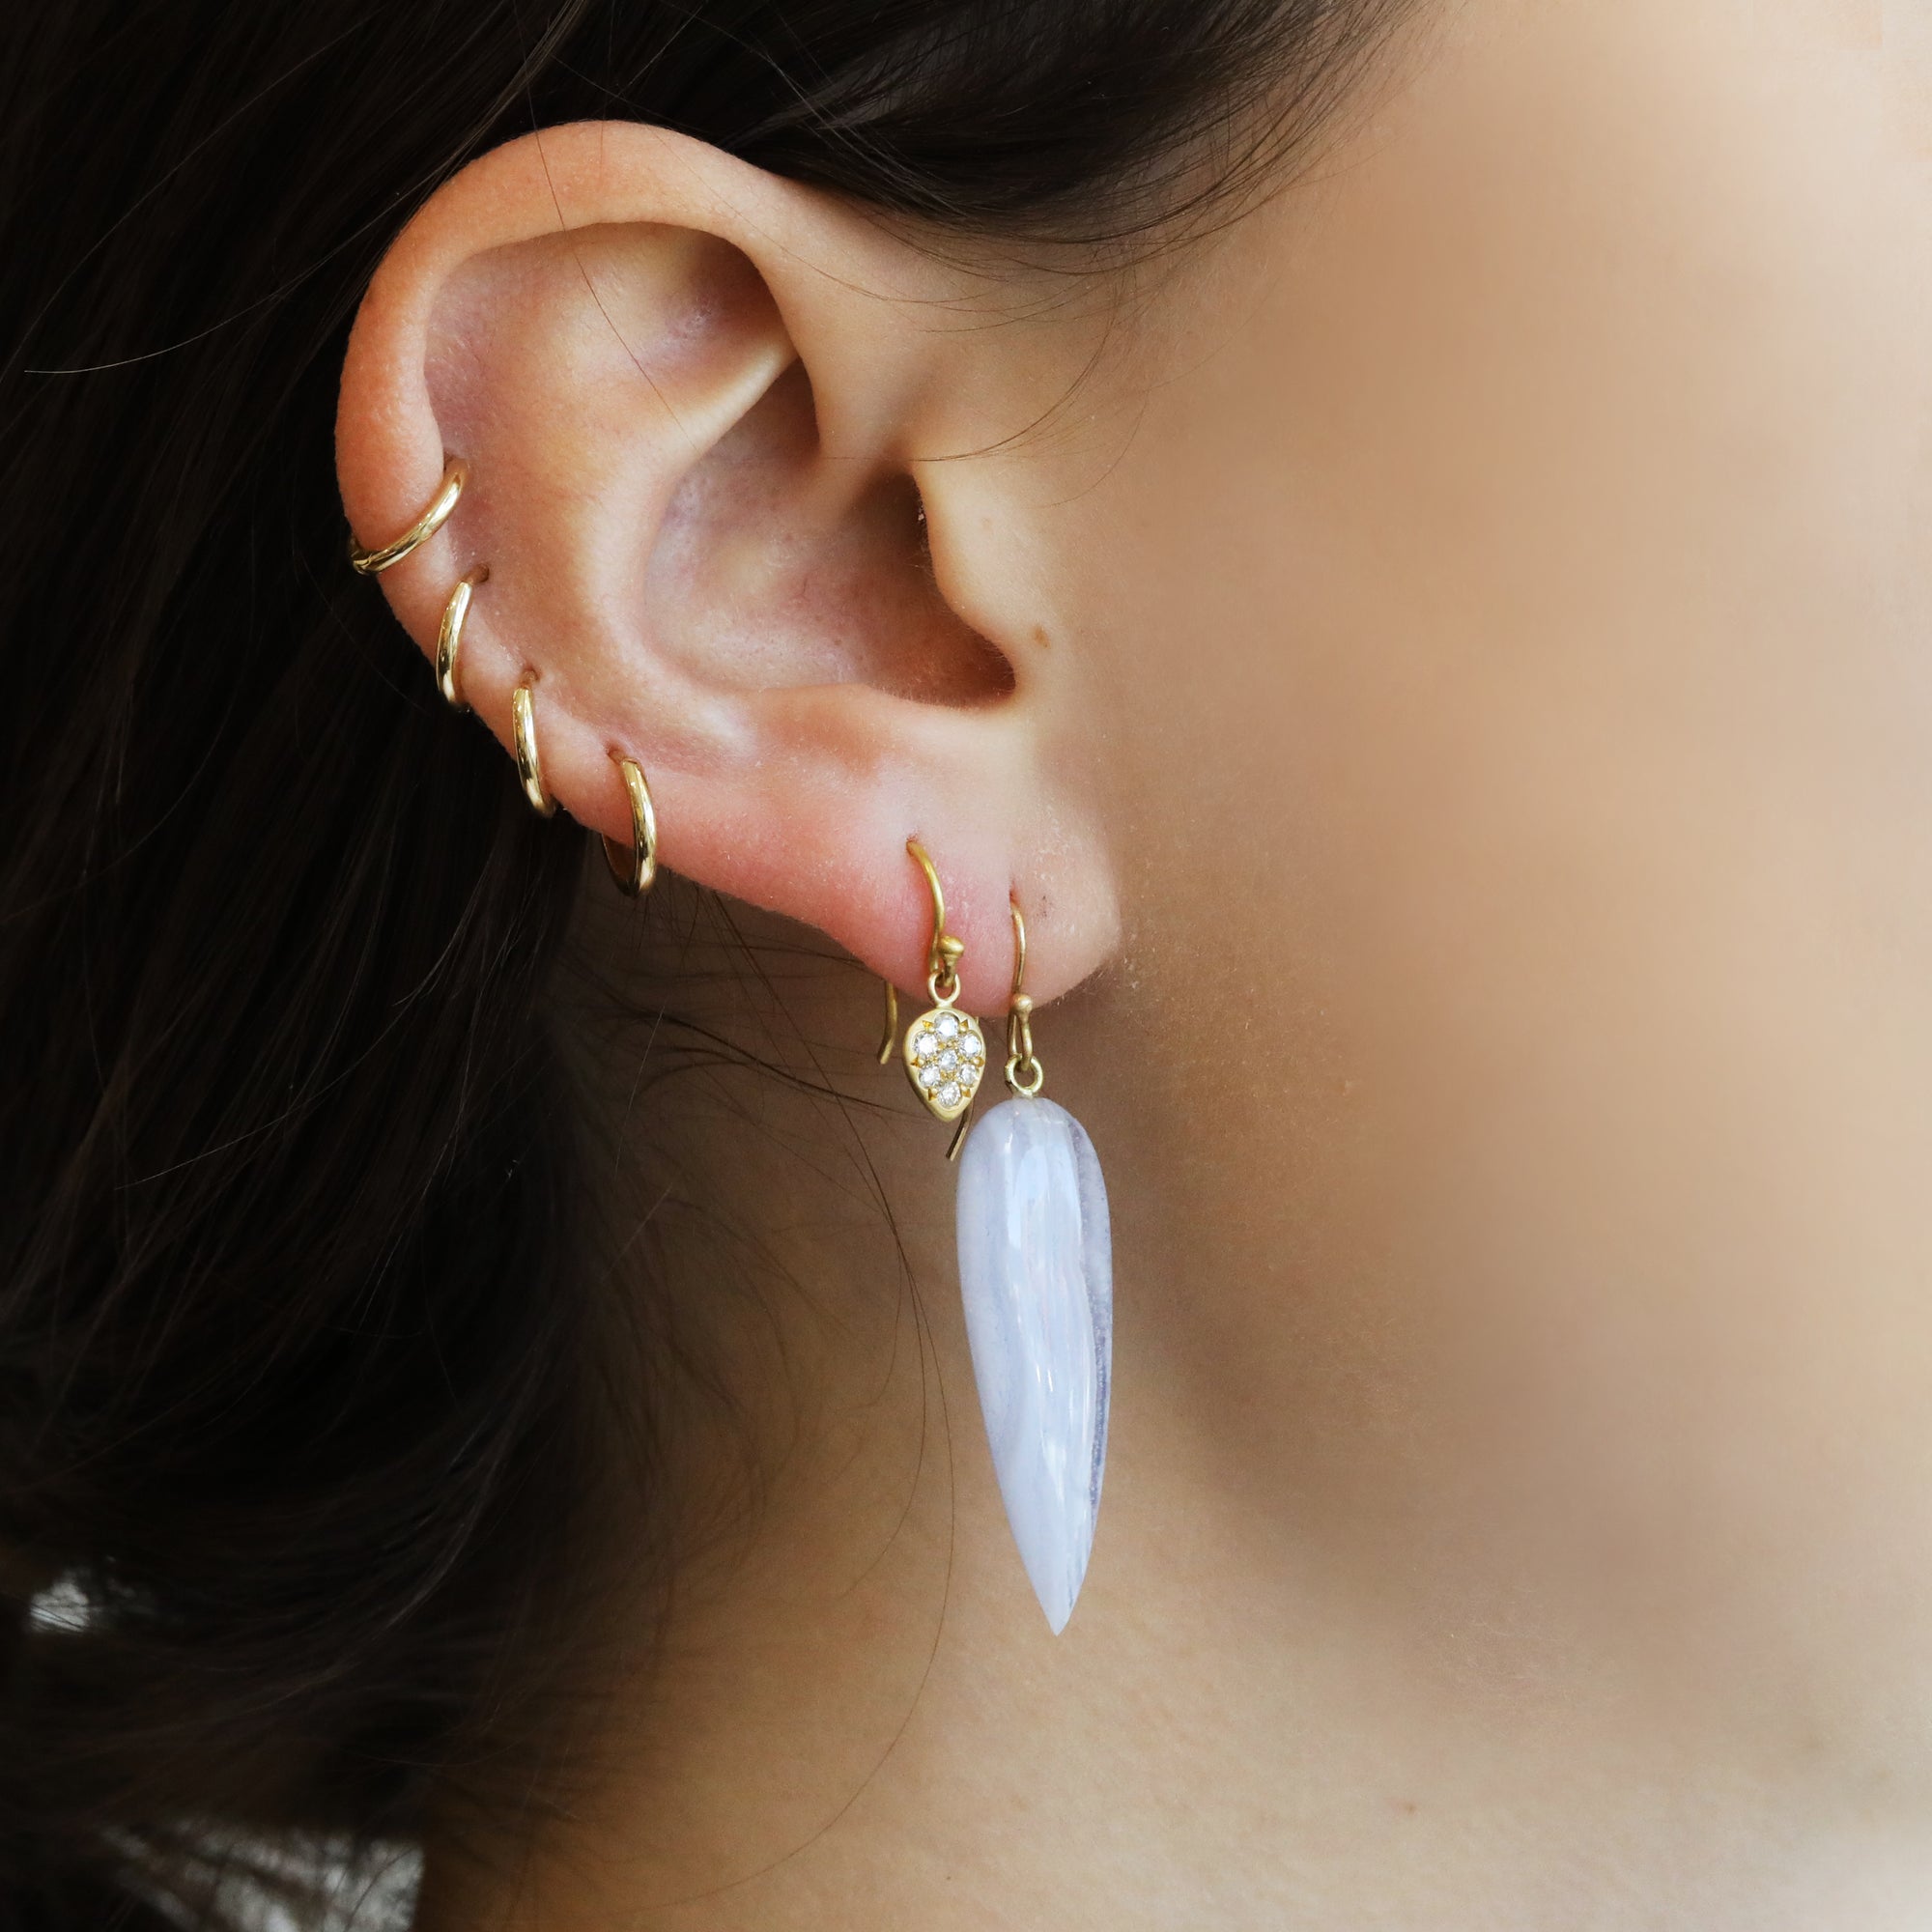 Smooth Inverted Teardrop Blue Lace Agate Earrings